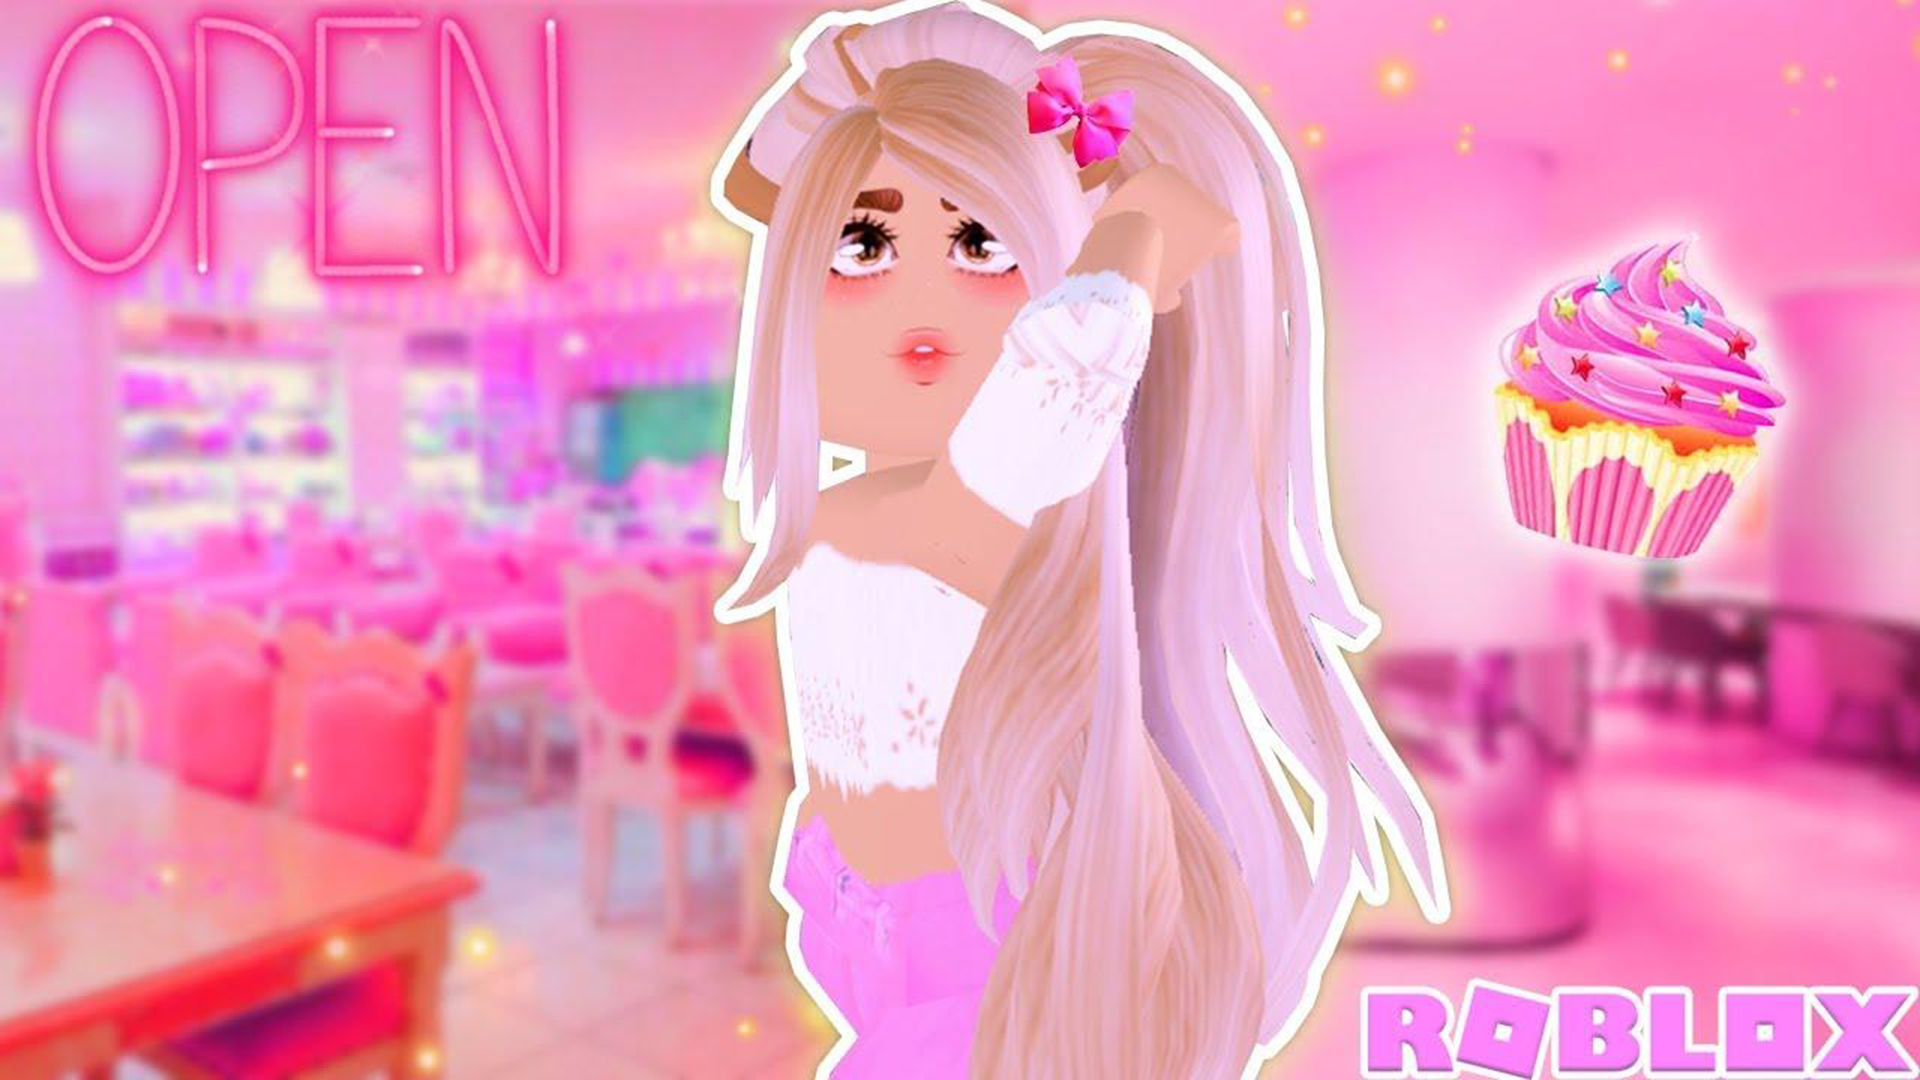 Cool Roblox Wallpapers: Cute Roblox Backgrounds for Girls